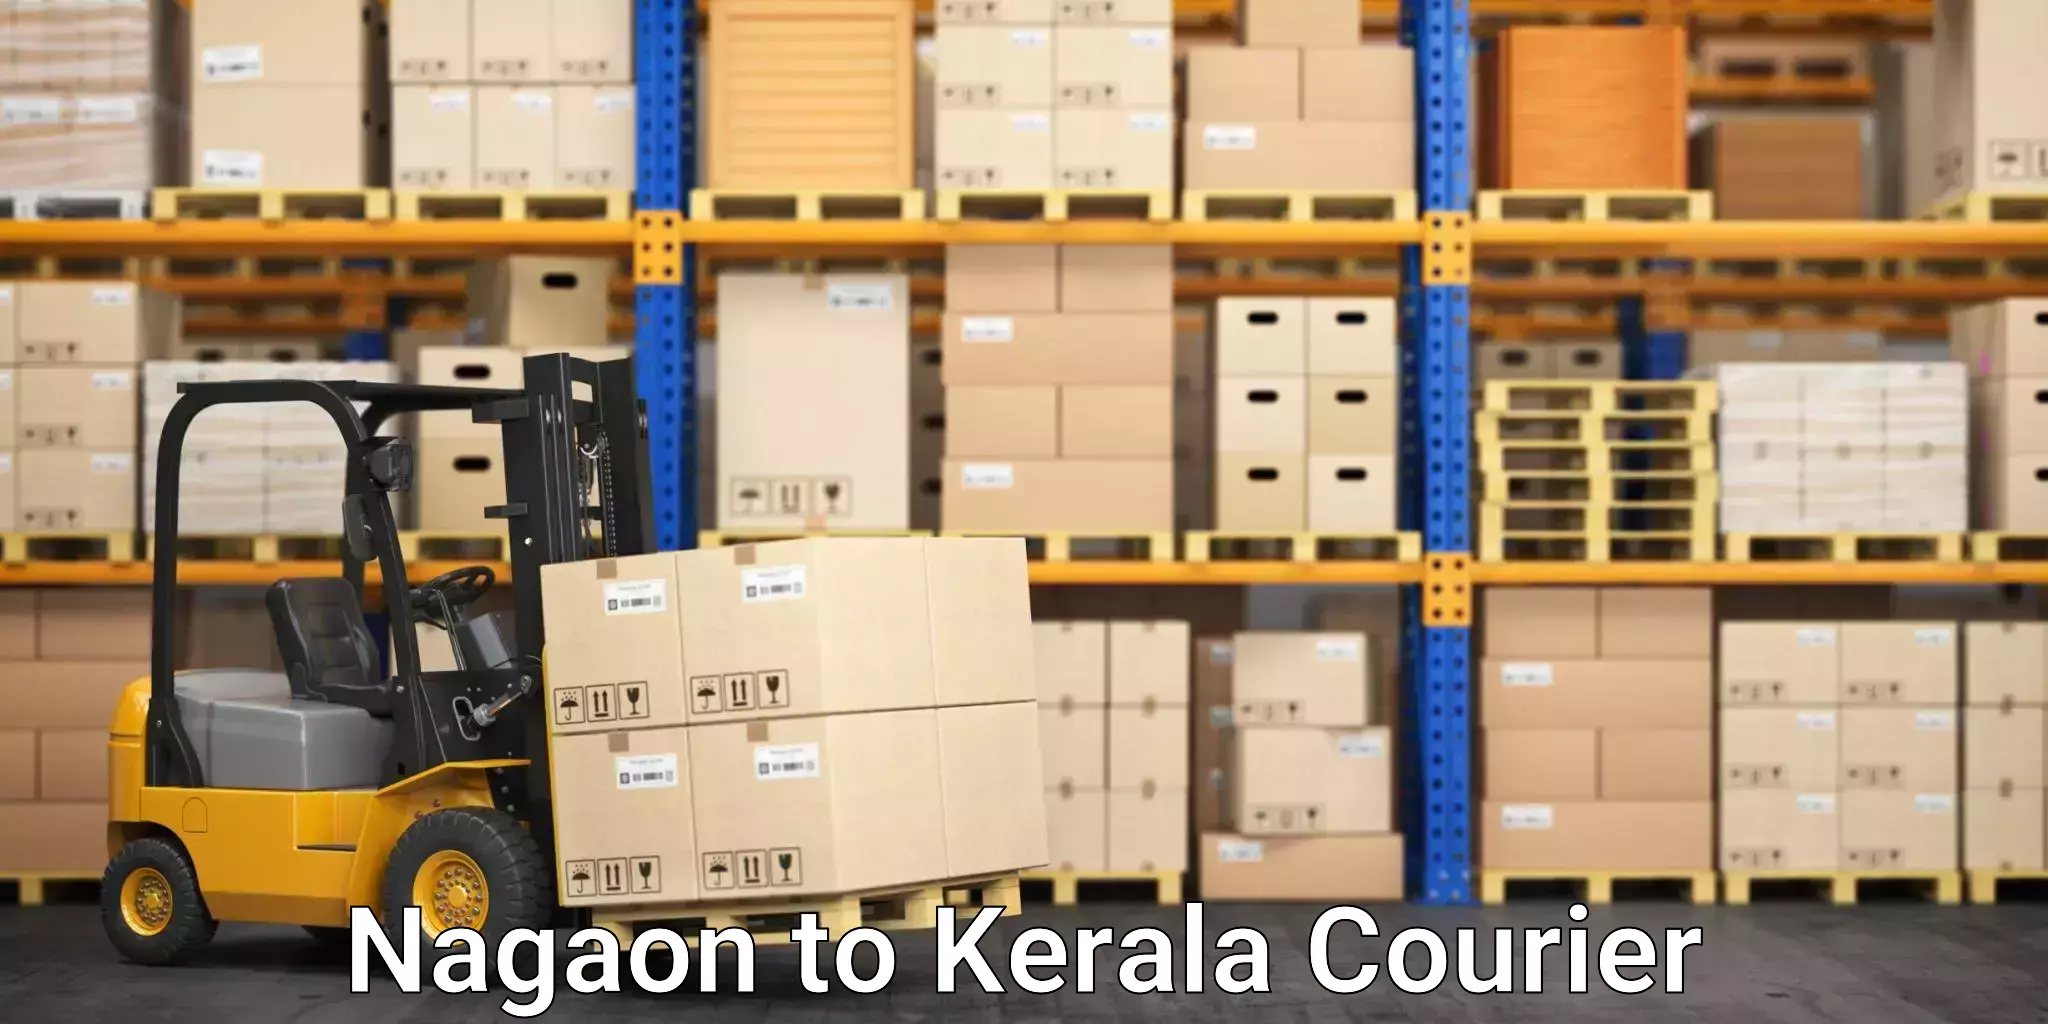 On-call courier service Nagaon to Kollam